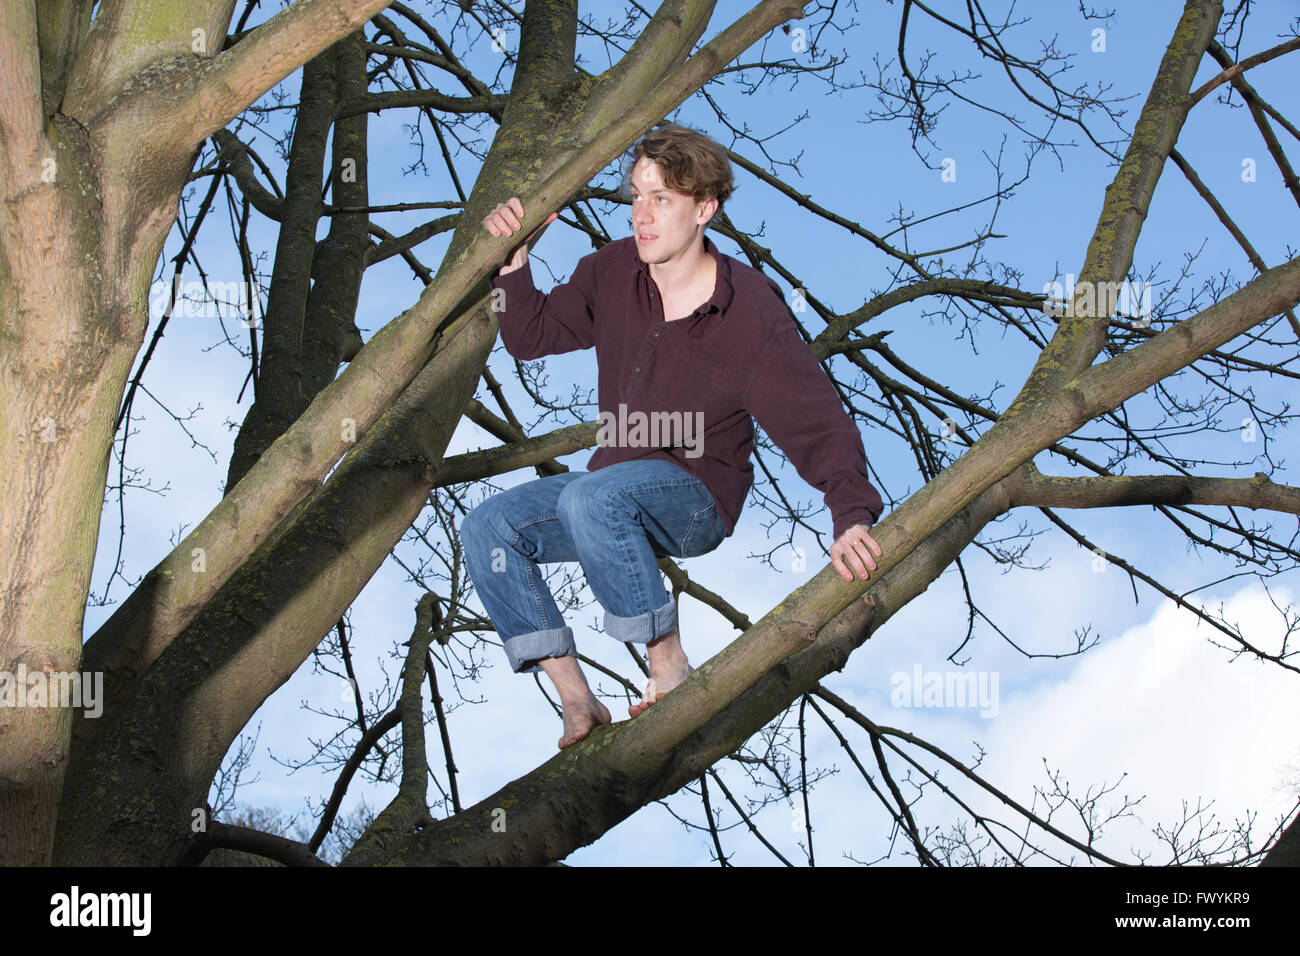 Jack Cooke, author of 'The Tree Climber's Guide', up in a tree in Ravenscourt Park, near Hammersmith, London, England, UK Stock Photo